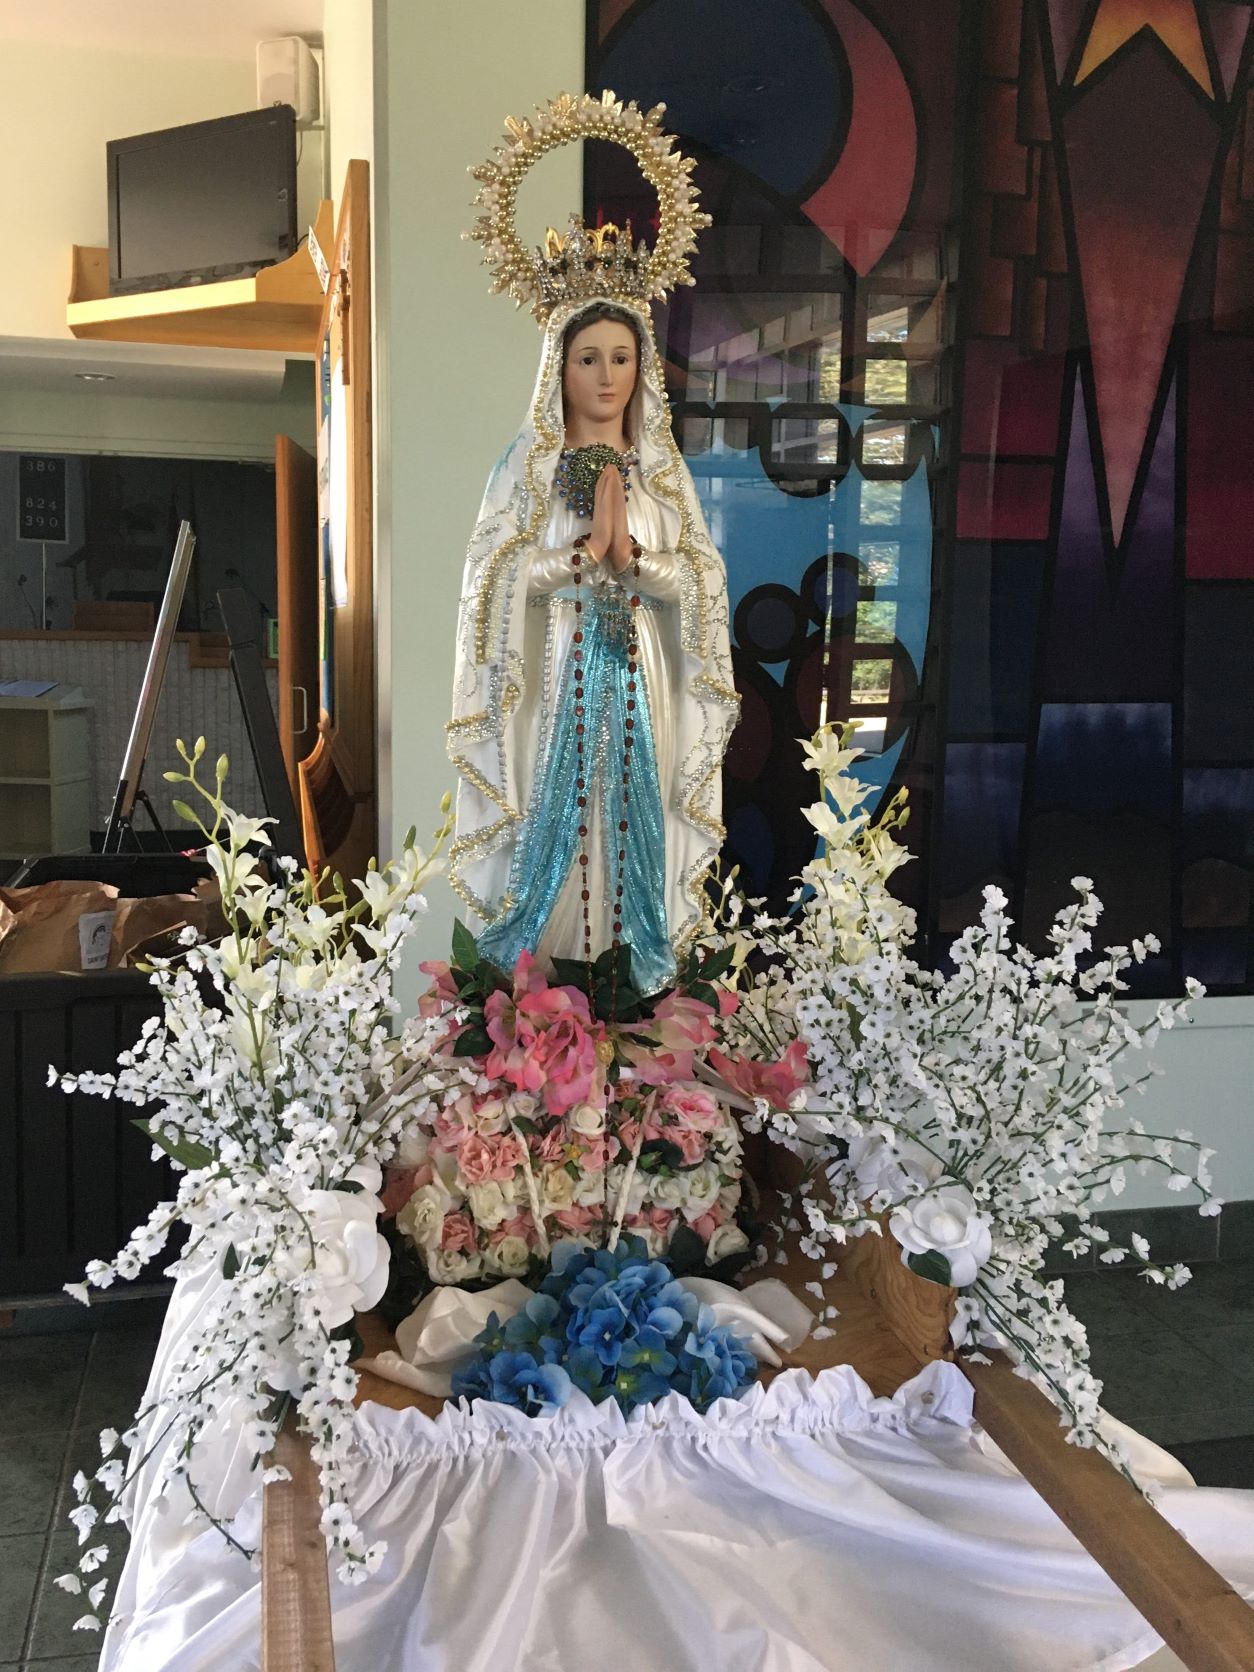 Statue of the Blessed Virgin surrounded by flowers